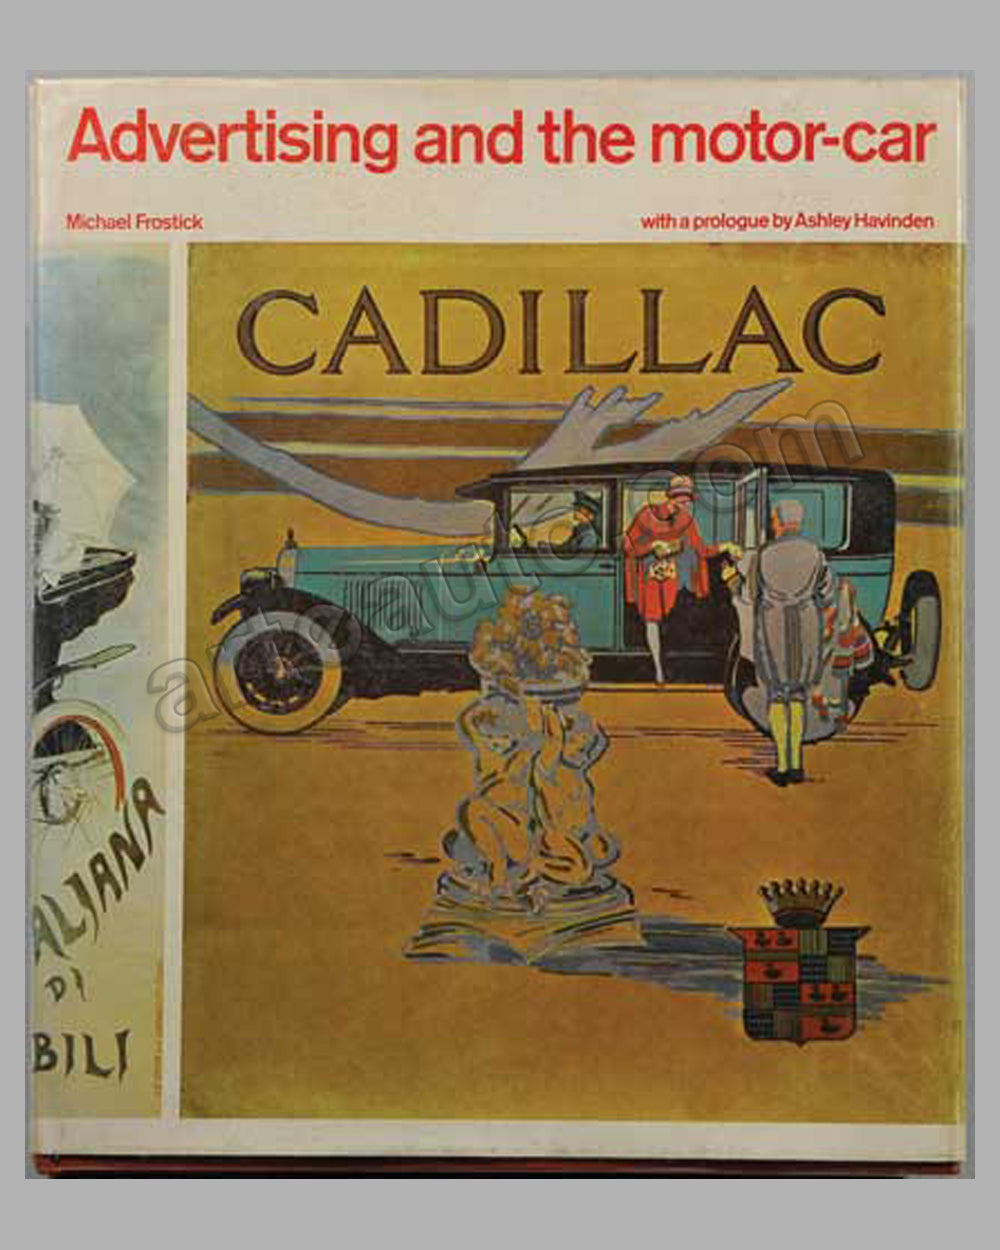 Advertising and the Motor-Car book by M. Frostick, 1970